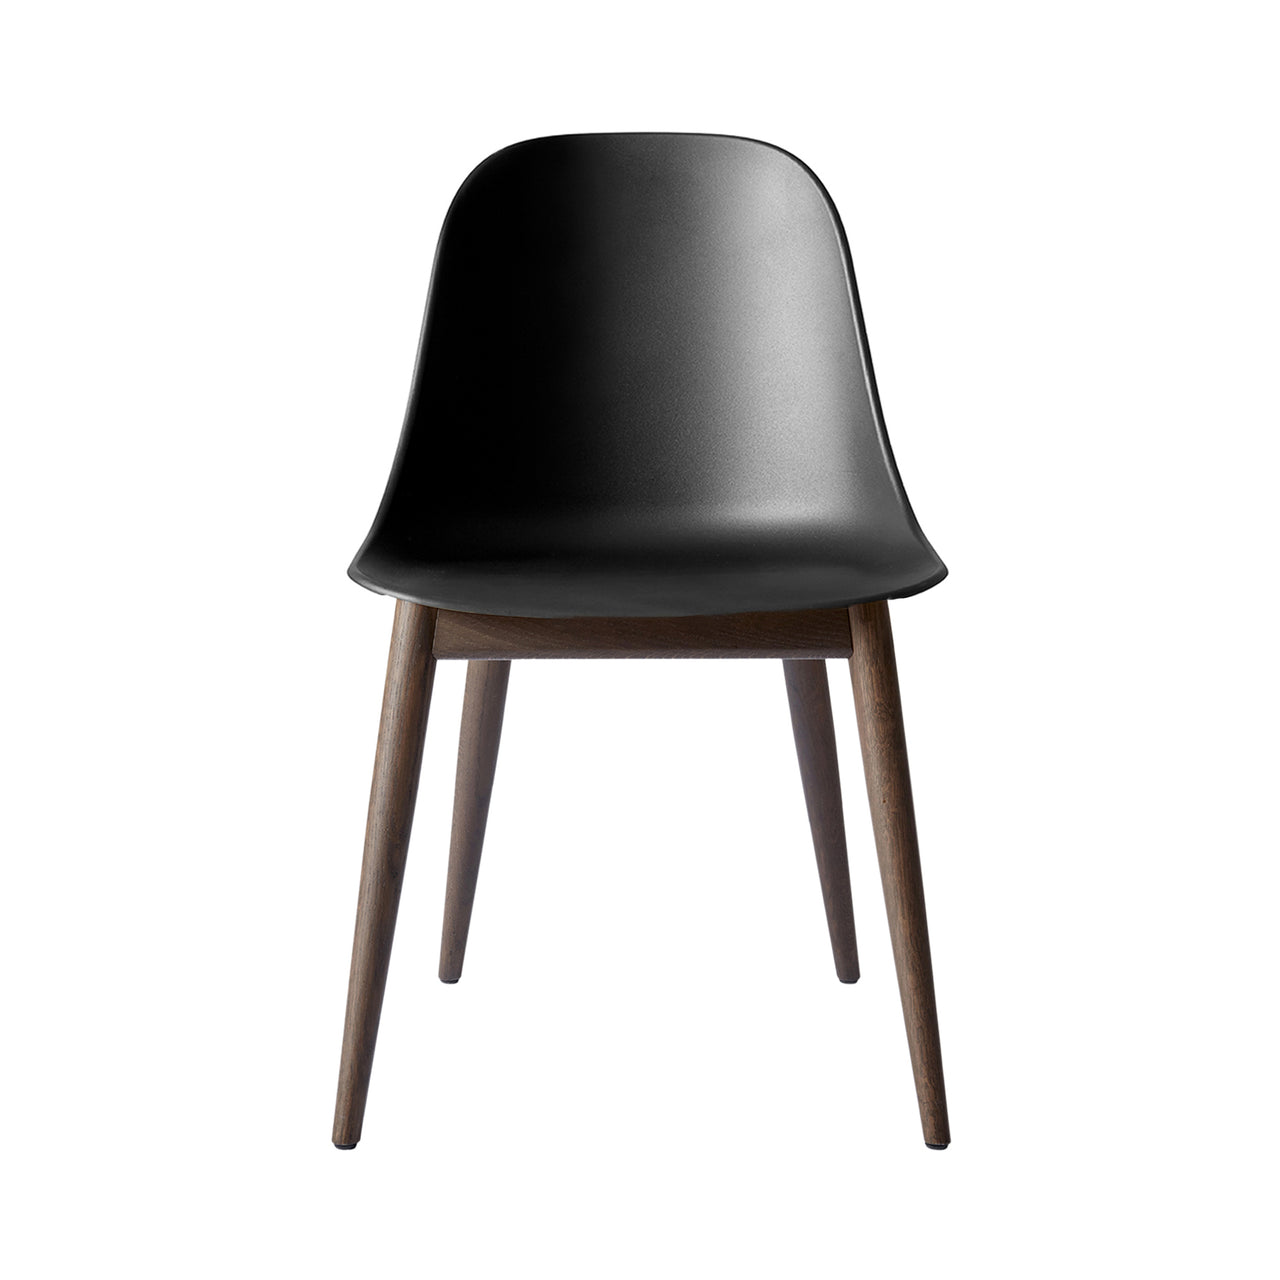 Harbour Side Chair: Wood Base + Dark Stained Oak + Black